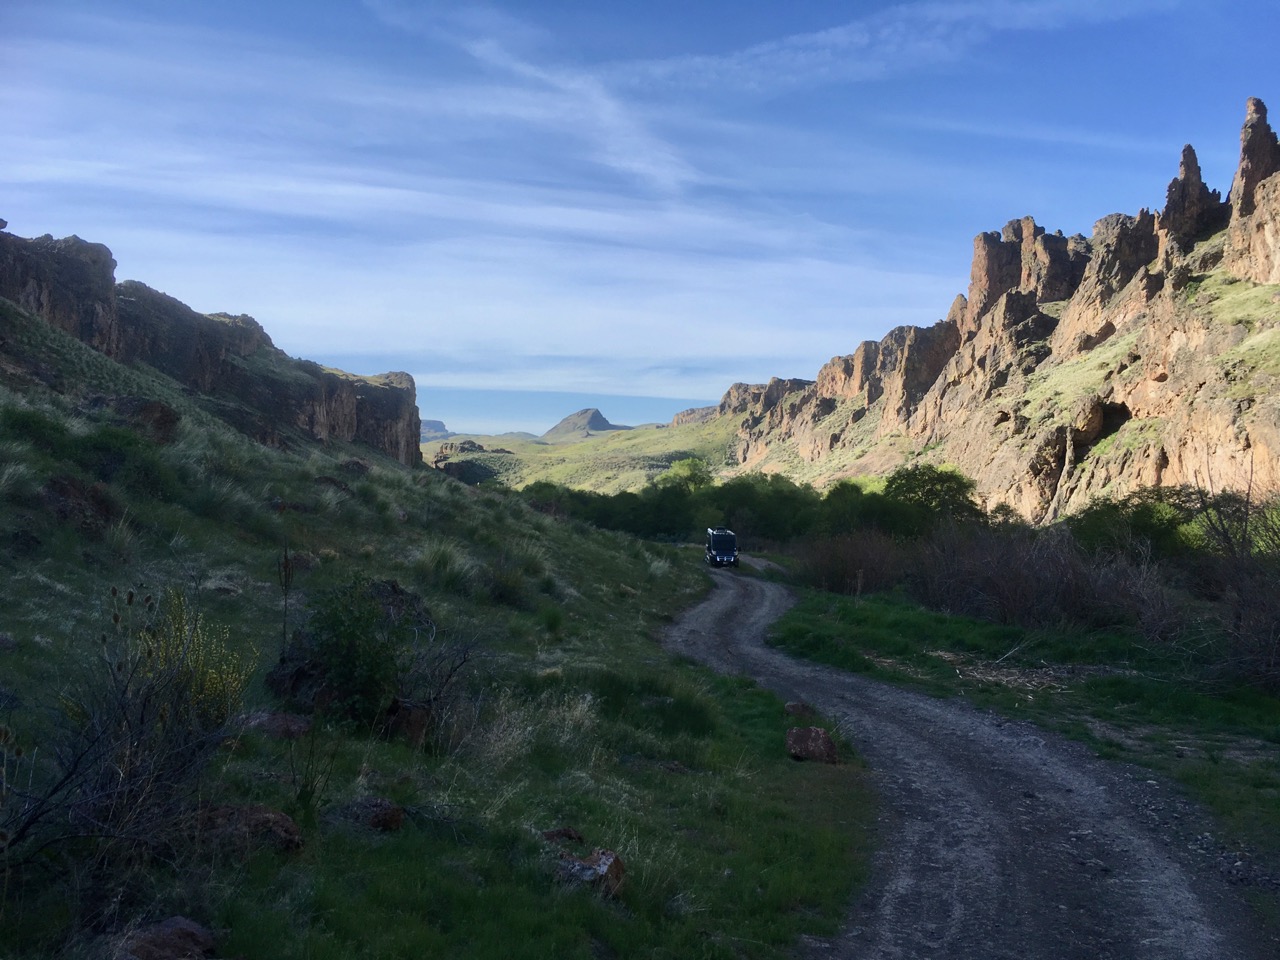 1000 Hikes in 1000 Days: Day 963: Little Caliente Hot 